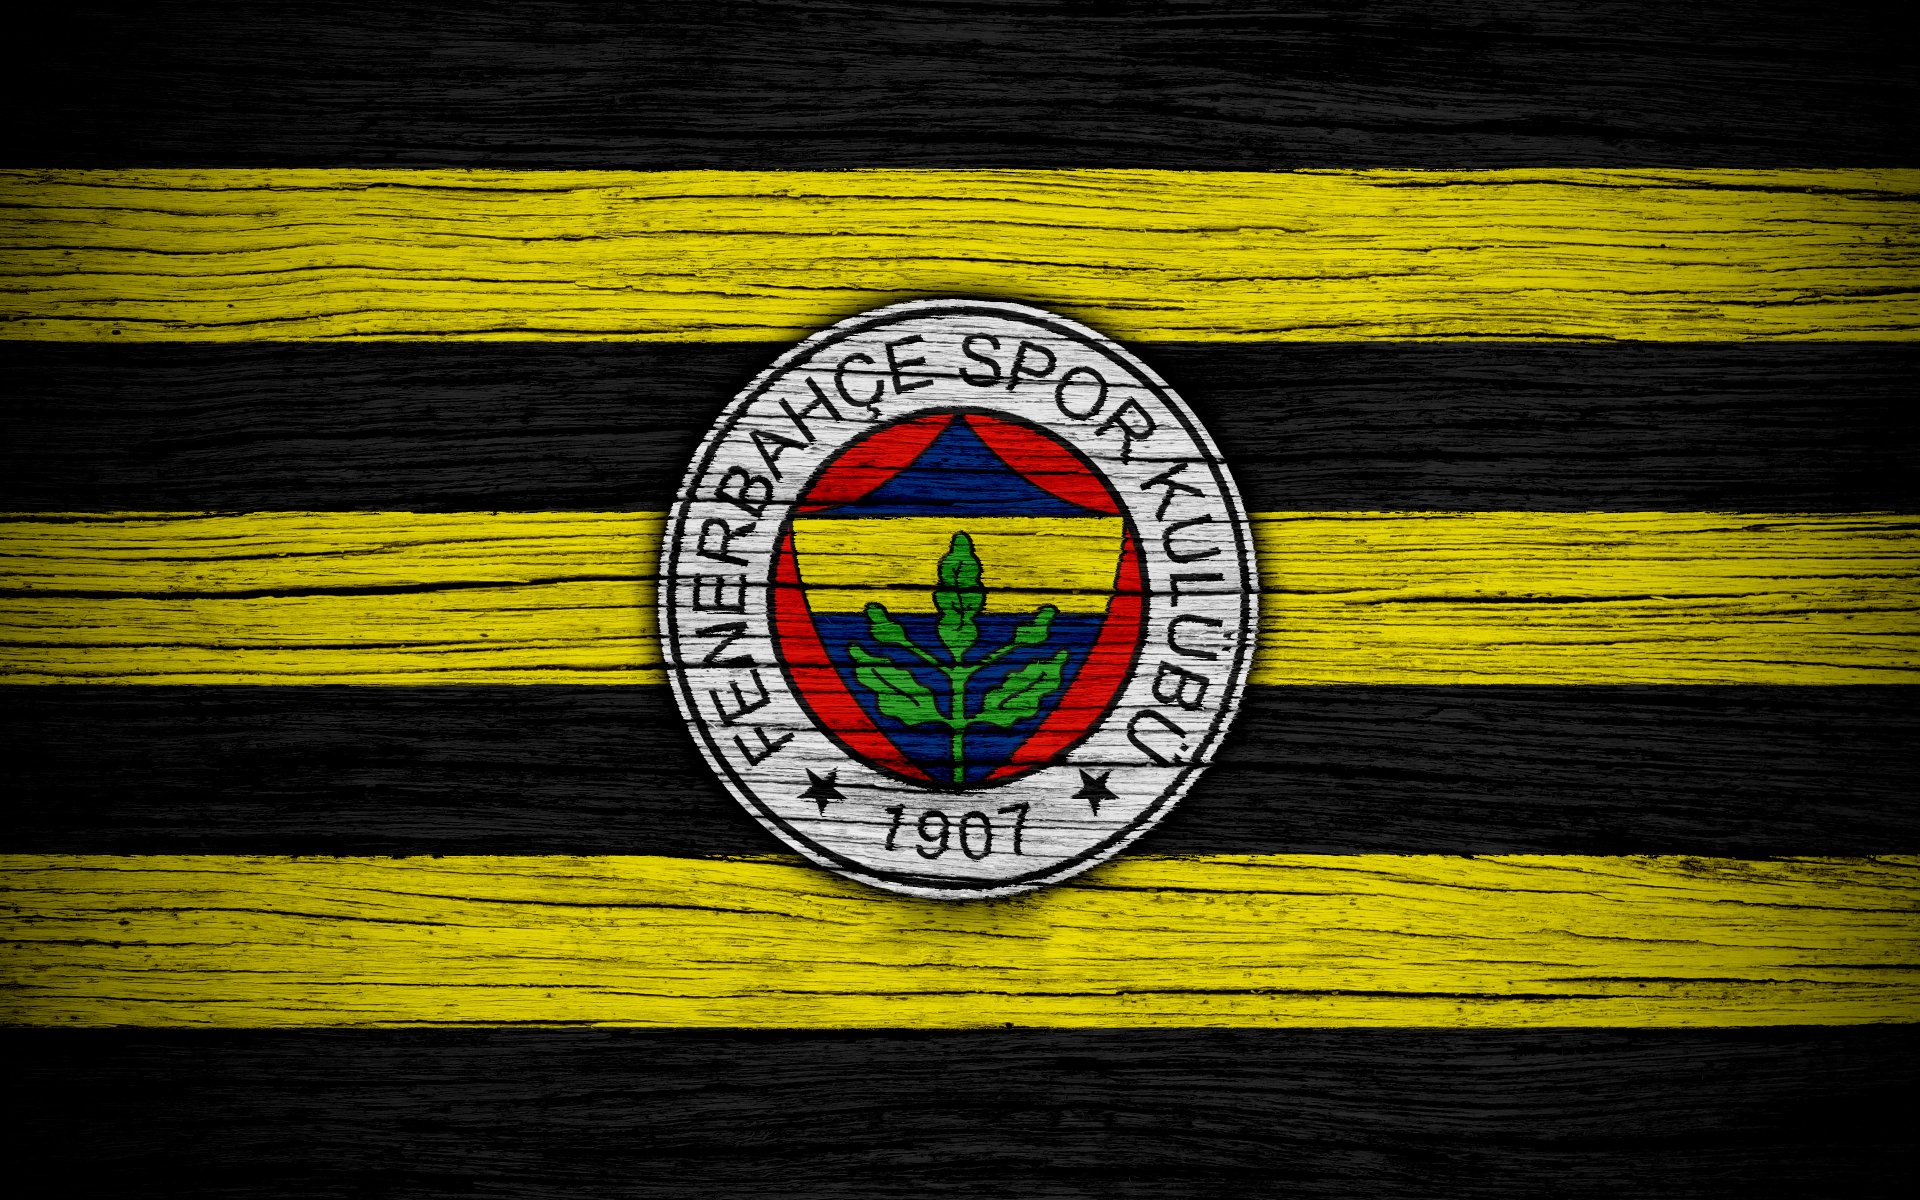 Fenerbahçe S.K. HD Wallpaper and Background Image